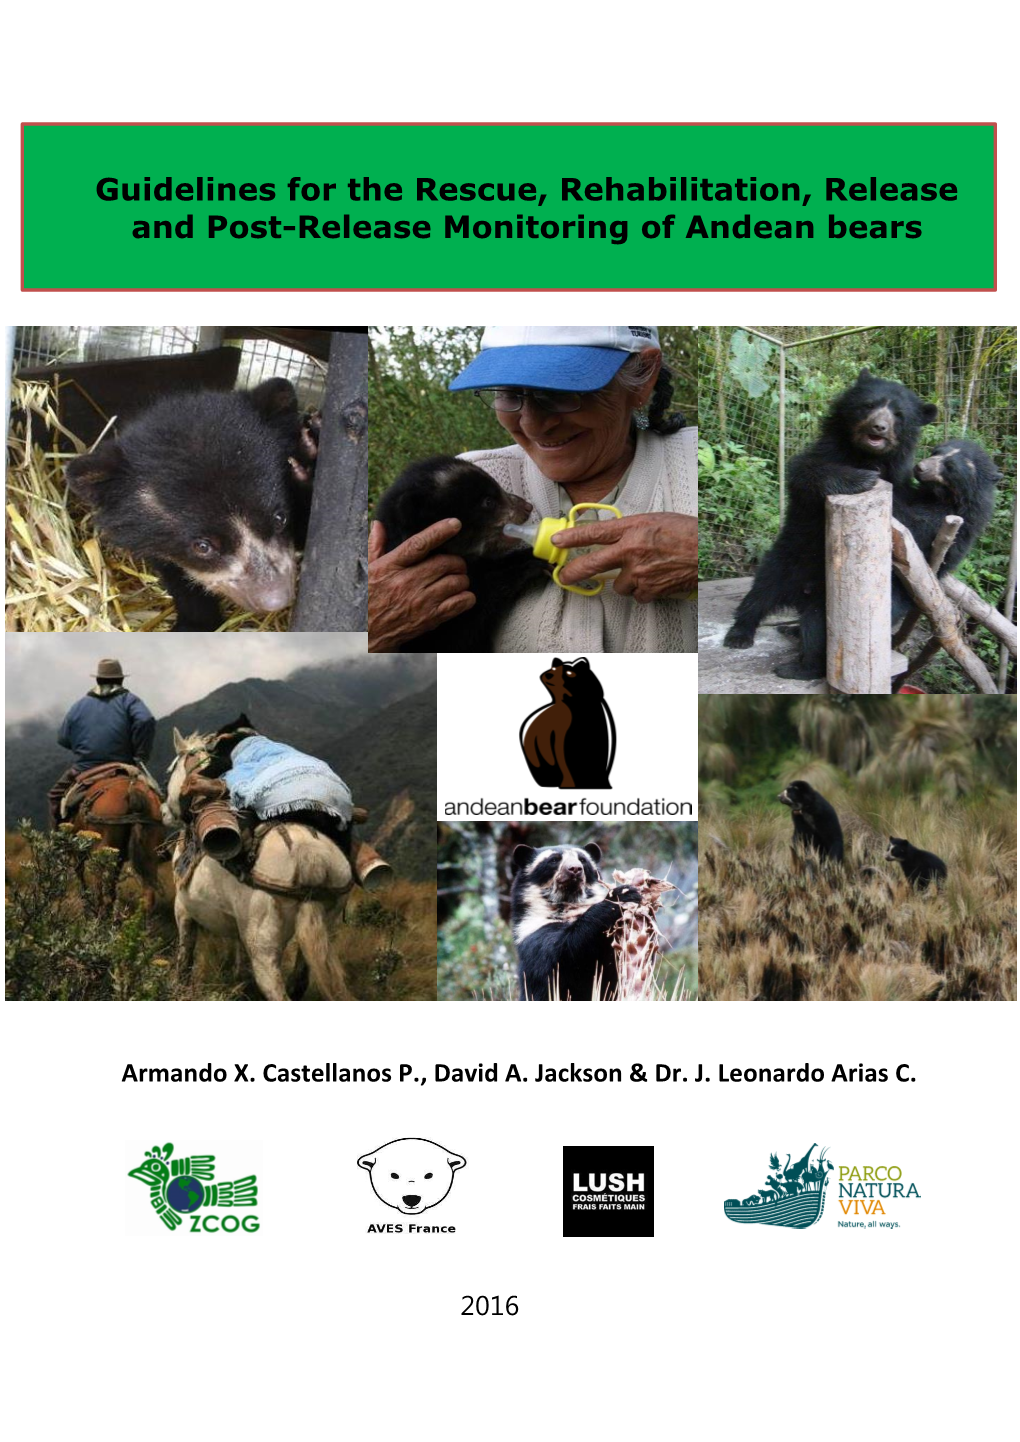 Guidelines for the Rescue, Rehabilitation, Release and Post-Release Monitoring of Andean Bears